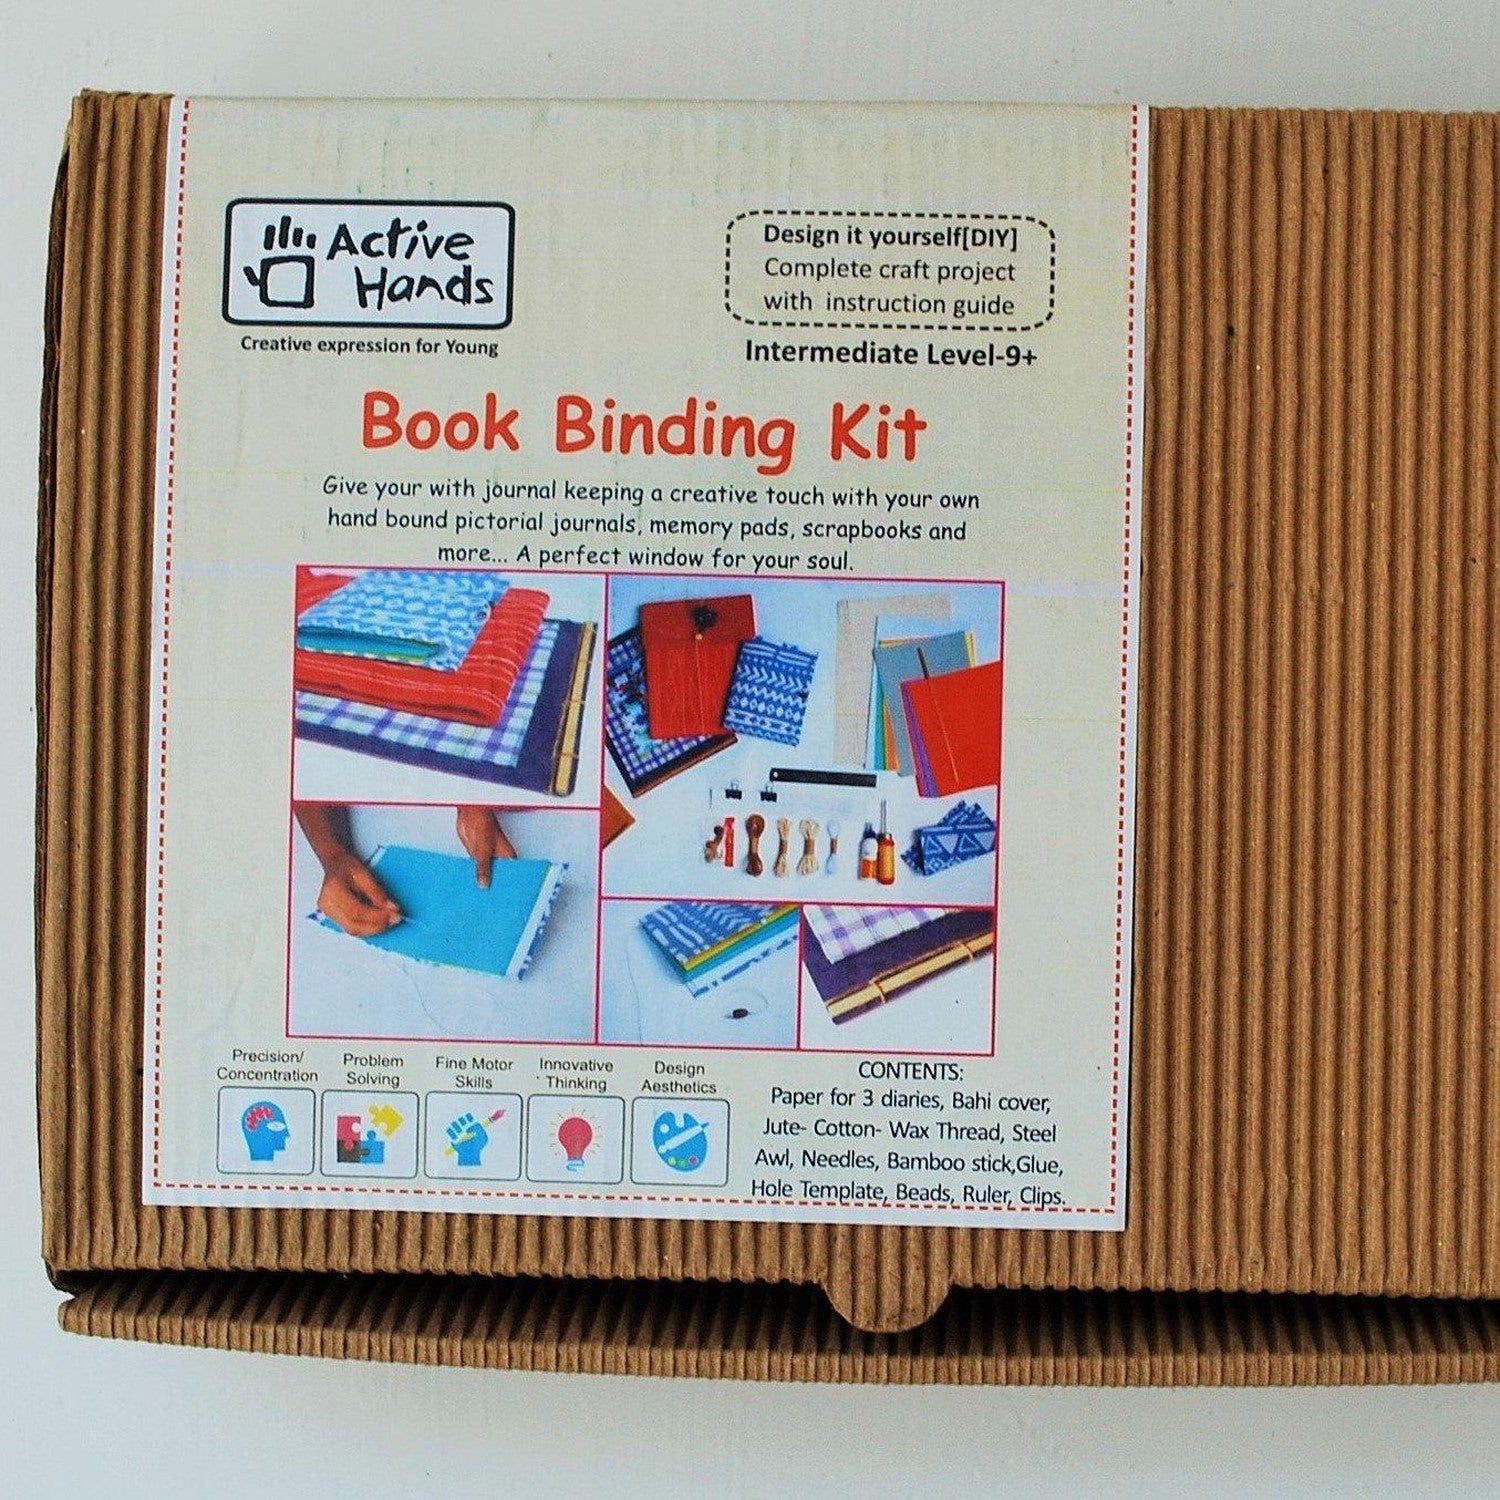 Bind Your Own Paperback Books With Ease  Book binding glue, Book binding  diy, Homemade books